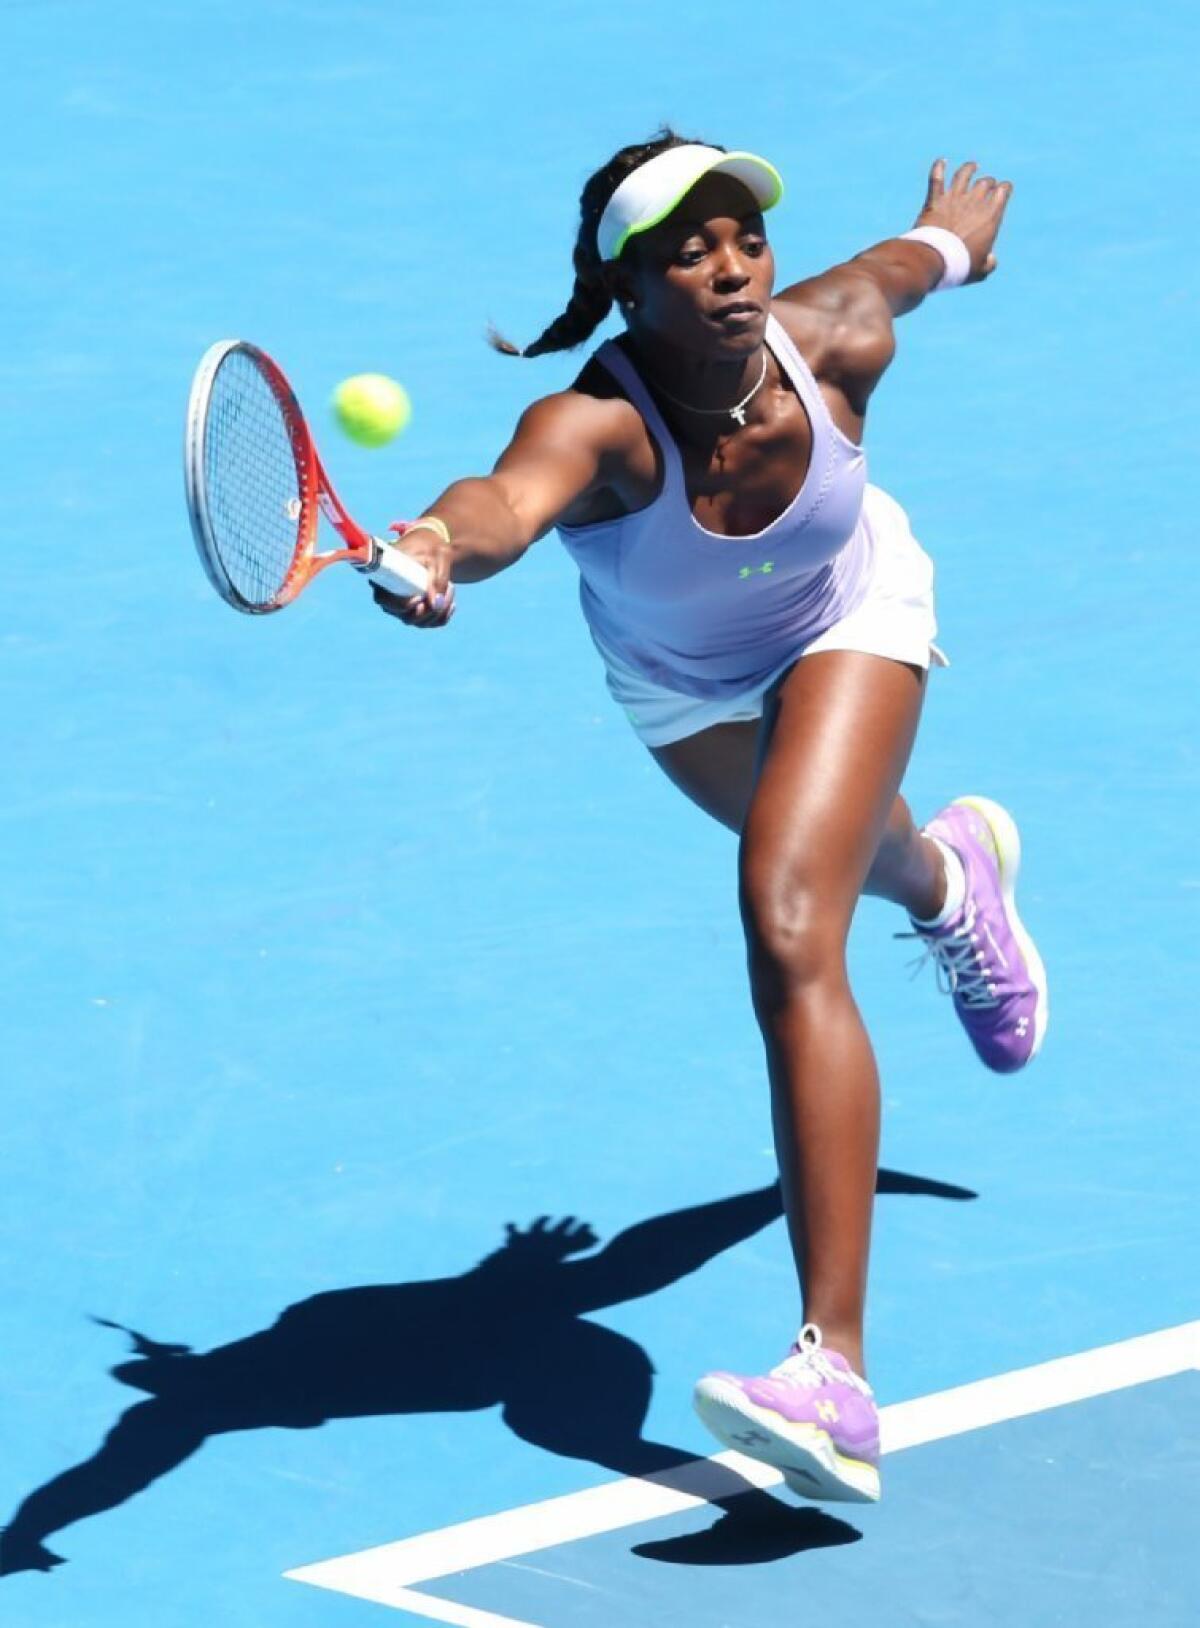 Sloane Stephens stretches for a shot in her Australian Open win over Serena Williams in the quarterfinals on Wednesday.